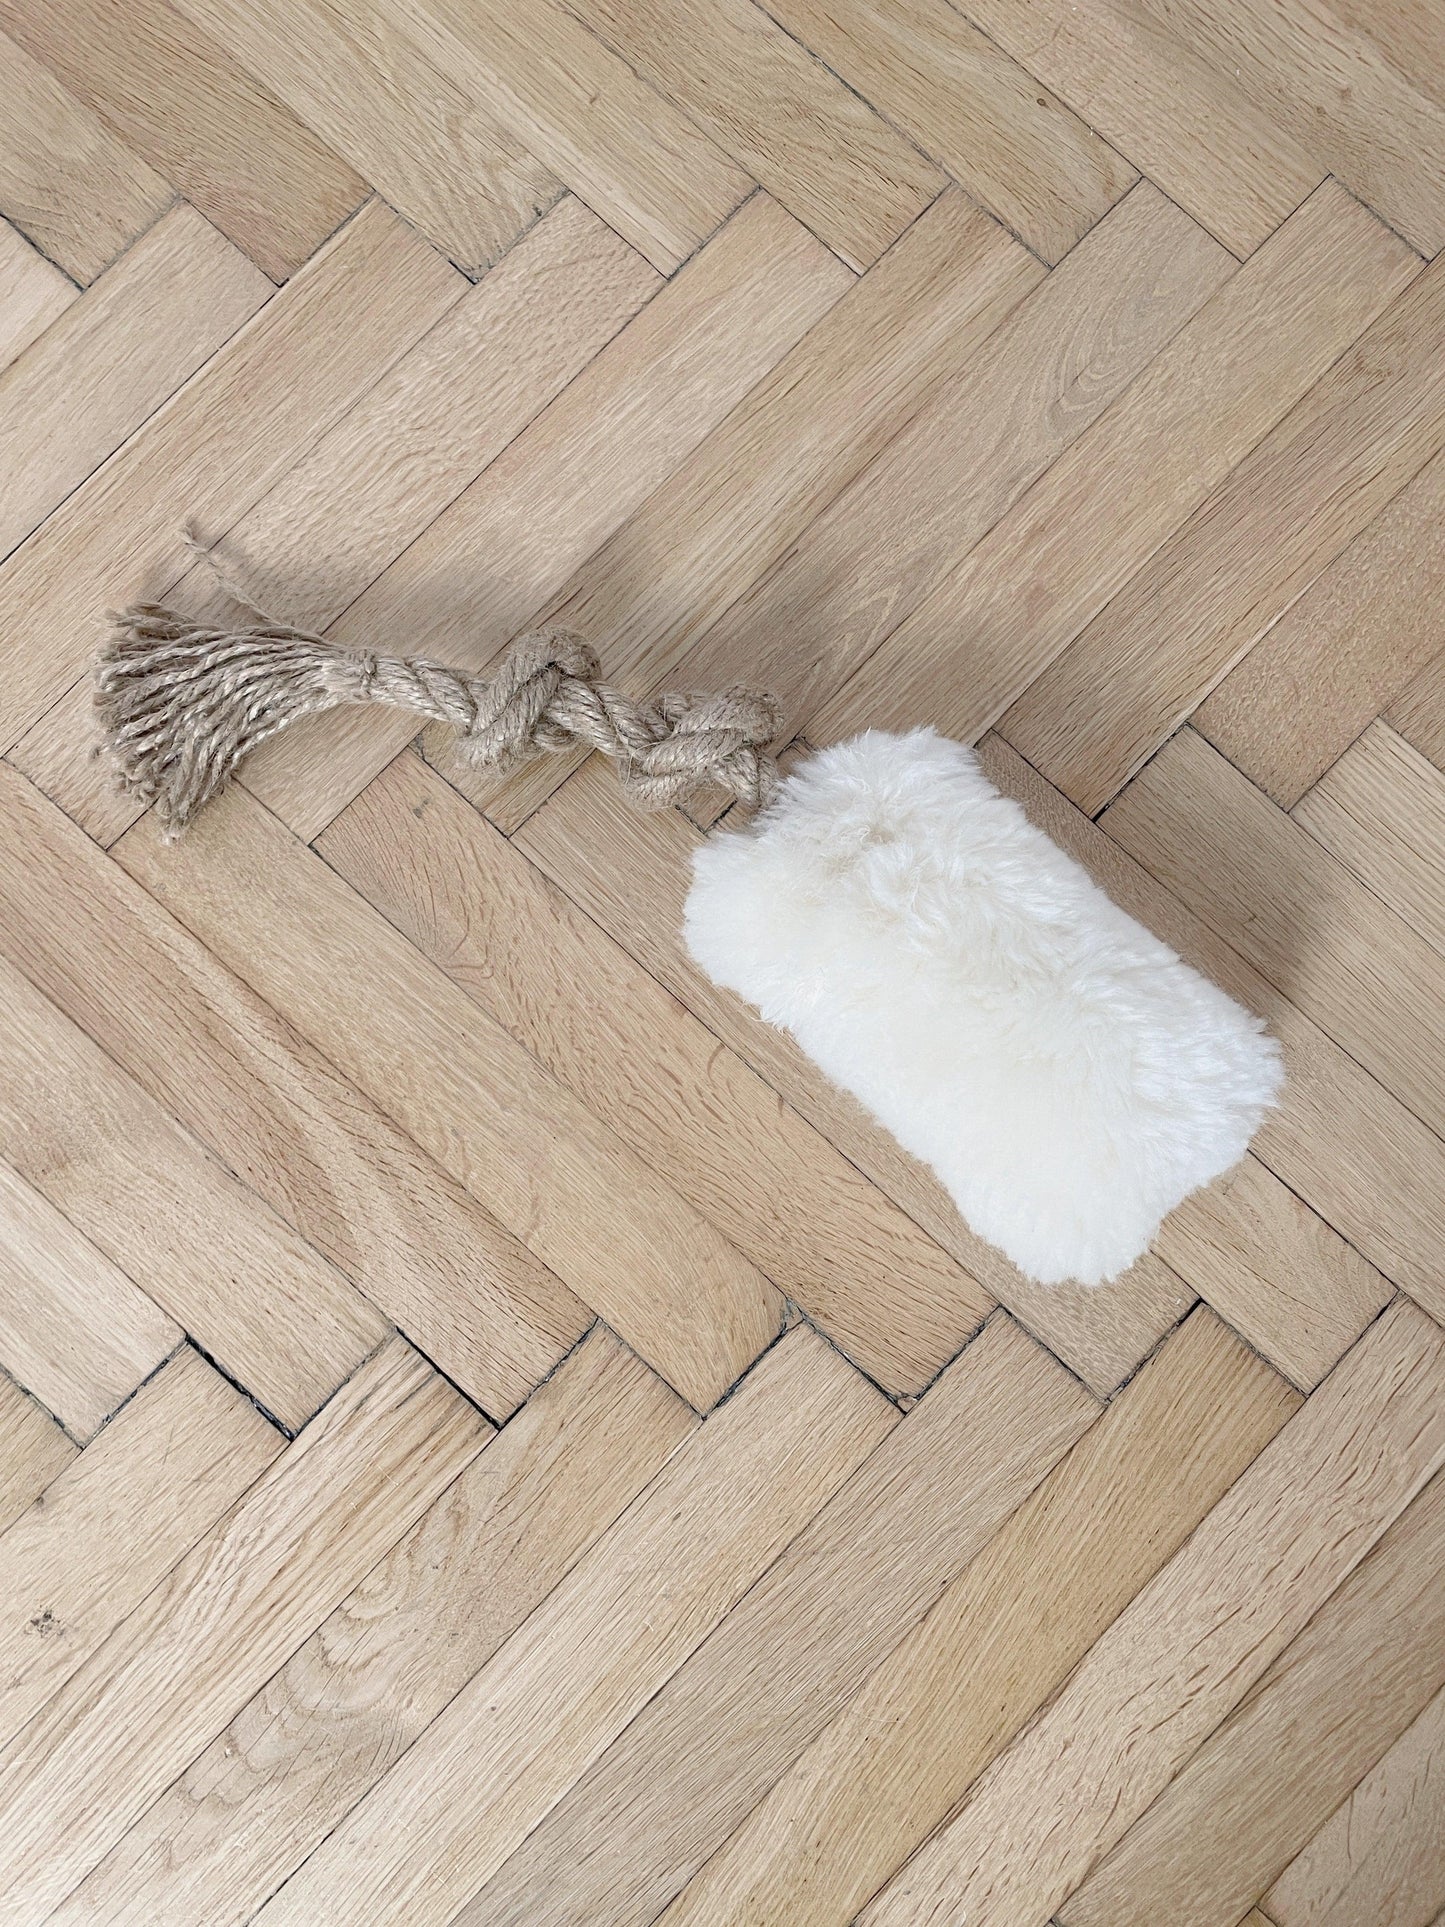 A white Natural Sheepskin Dog Tug Toy from Mellow Pet Store is placed on a wooden floor, offering a touch of eco-luxury in pet care.